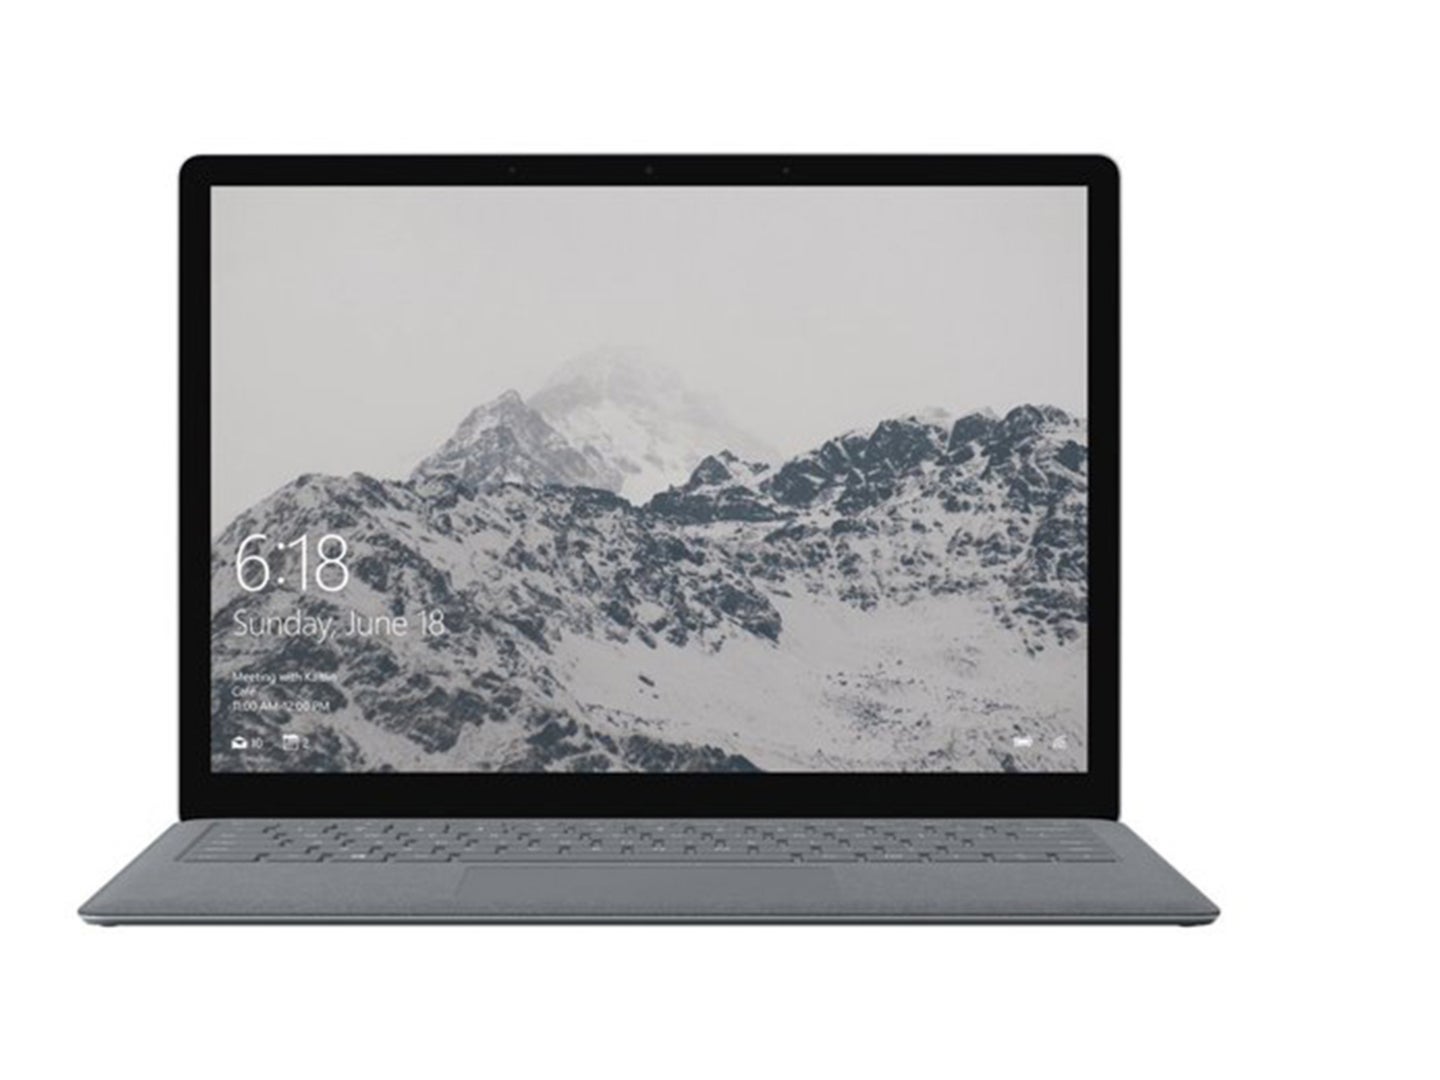 A Microsoft Surface laptop on a white background